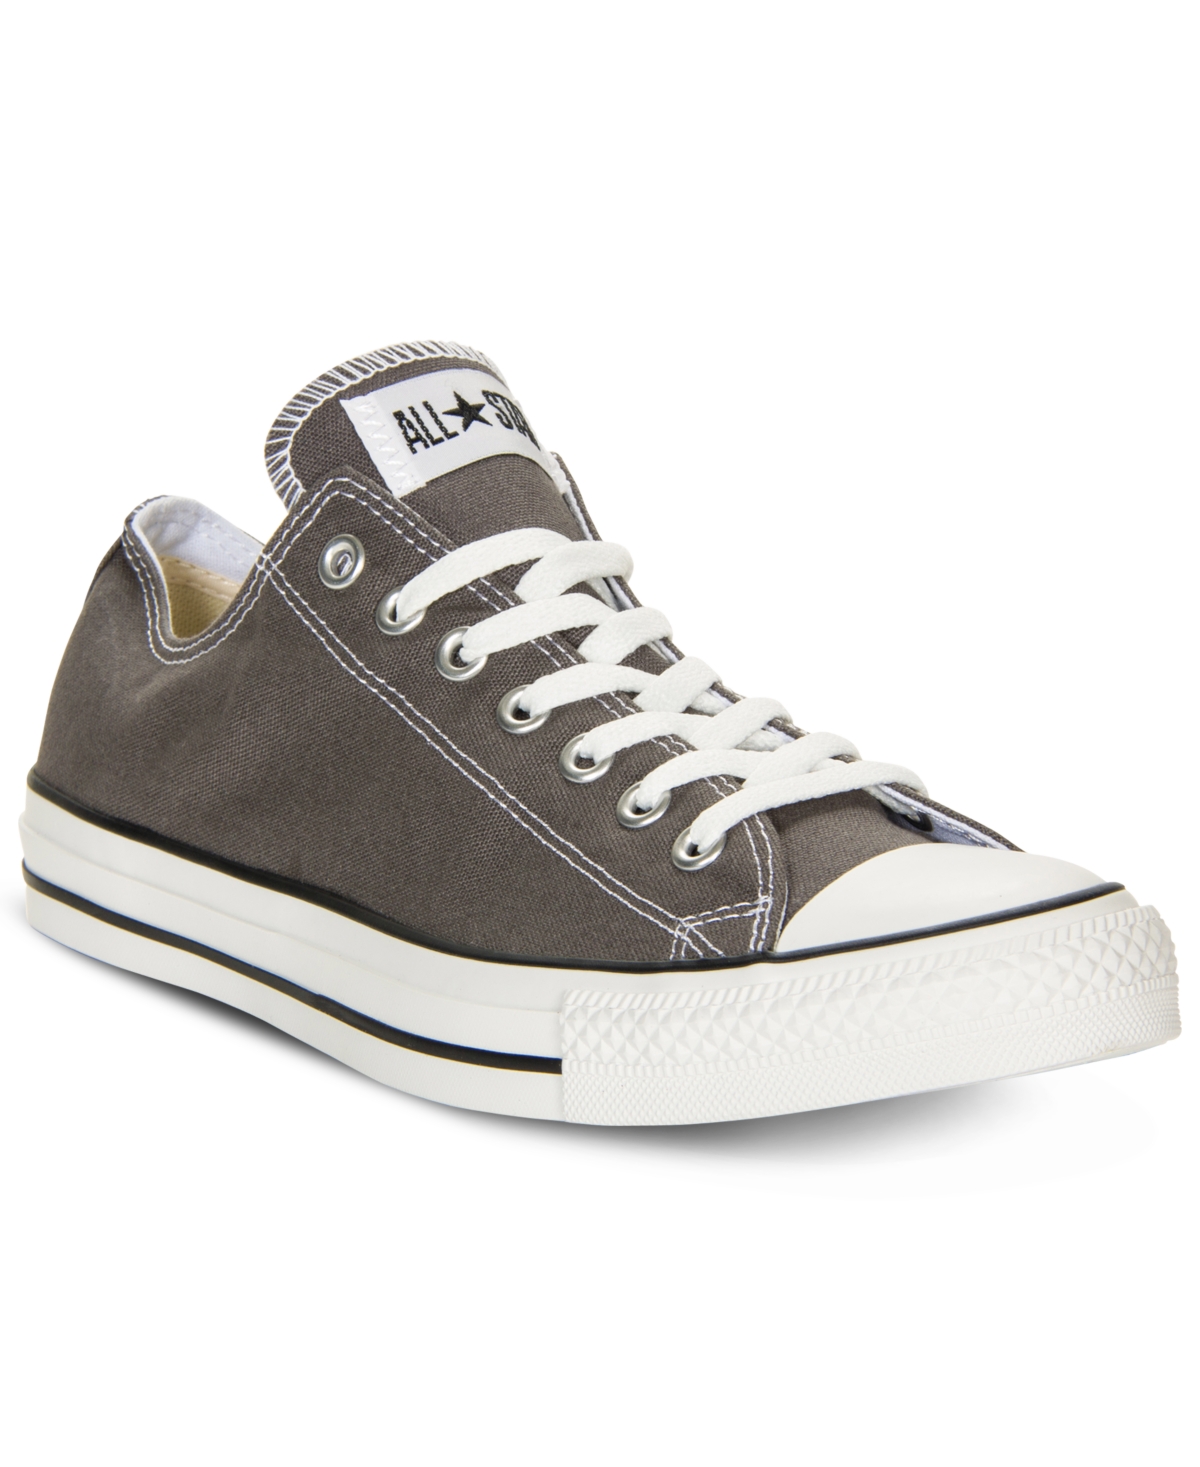 UPC 022859975858 product image for Converse Men's Chuck Taylor Low Top Sneakers from Finish Line | upcitemdb.com